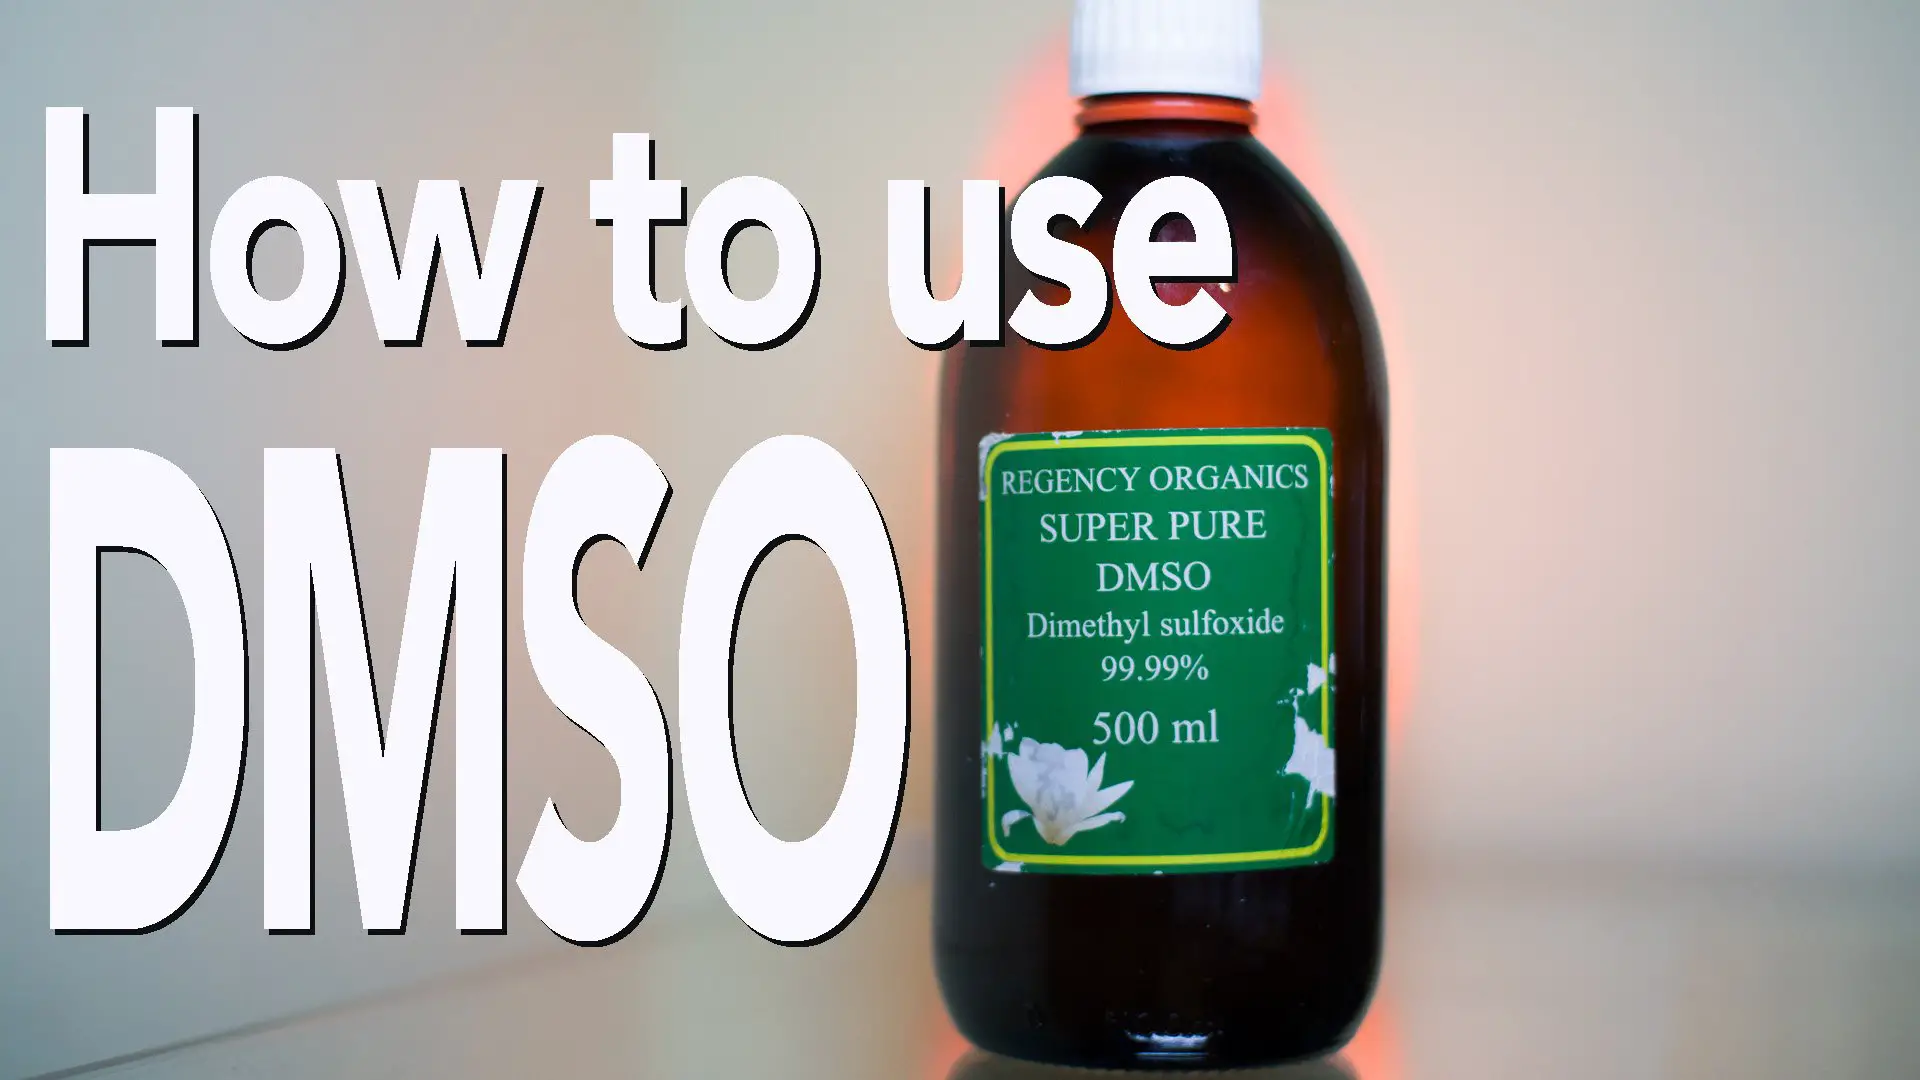 How to use DMSO